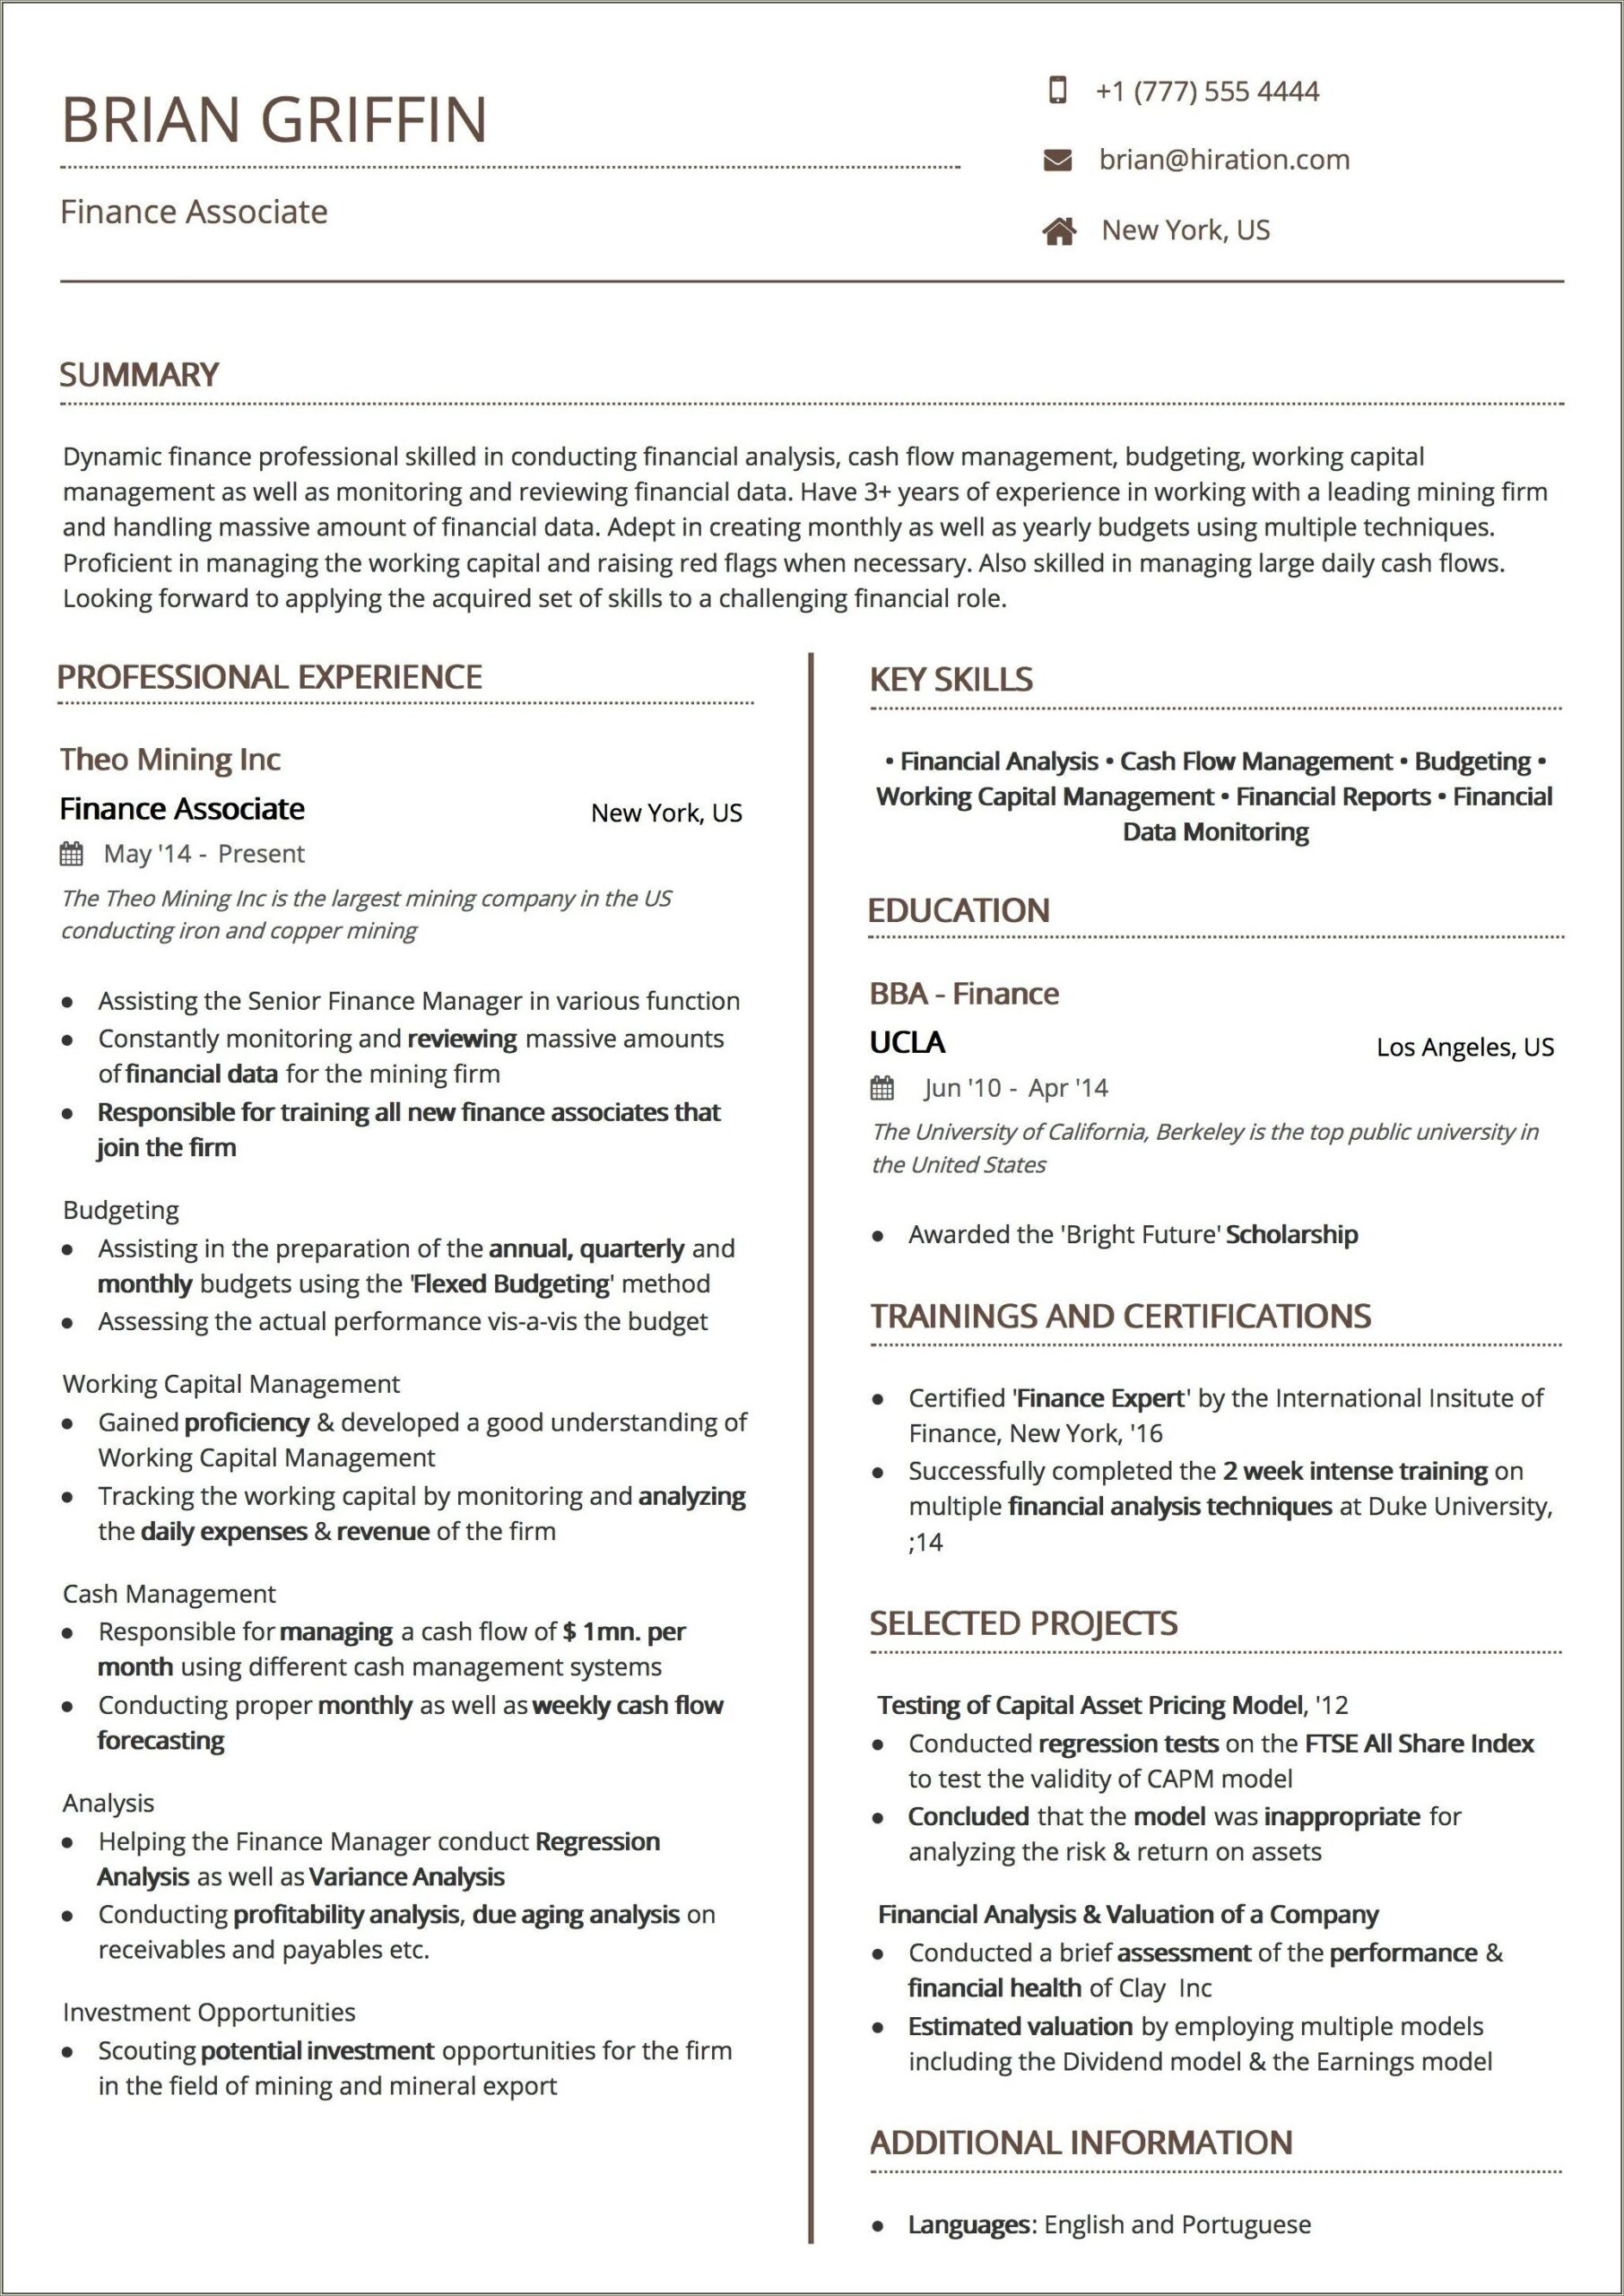 Resume Template For A Lot Of Information